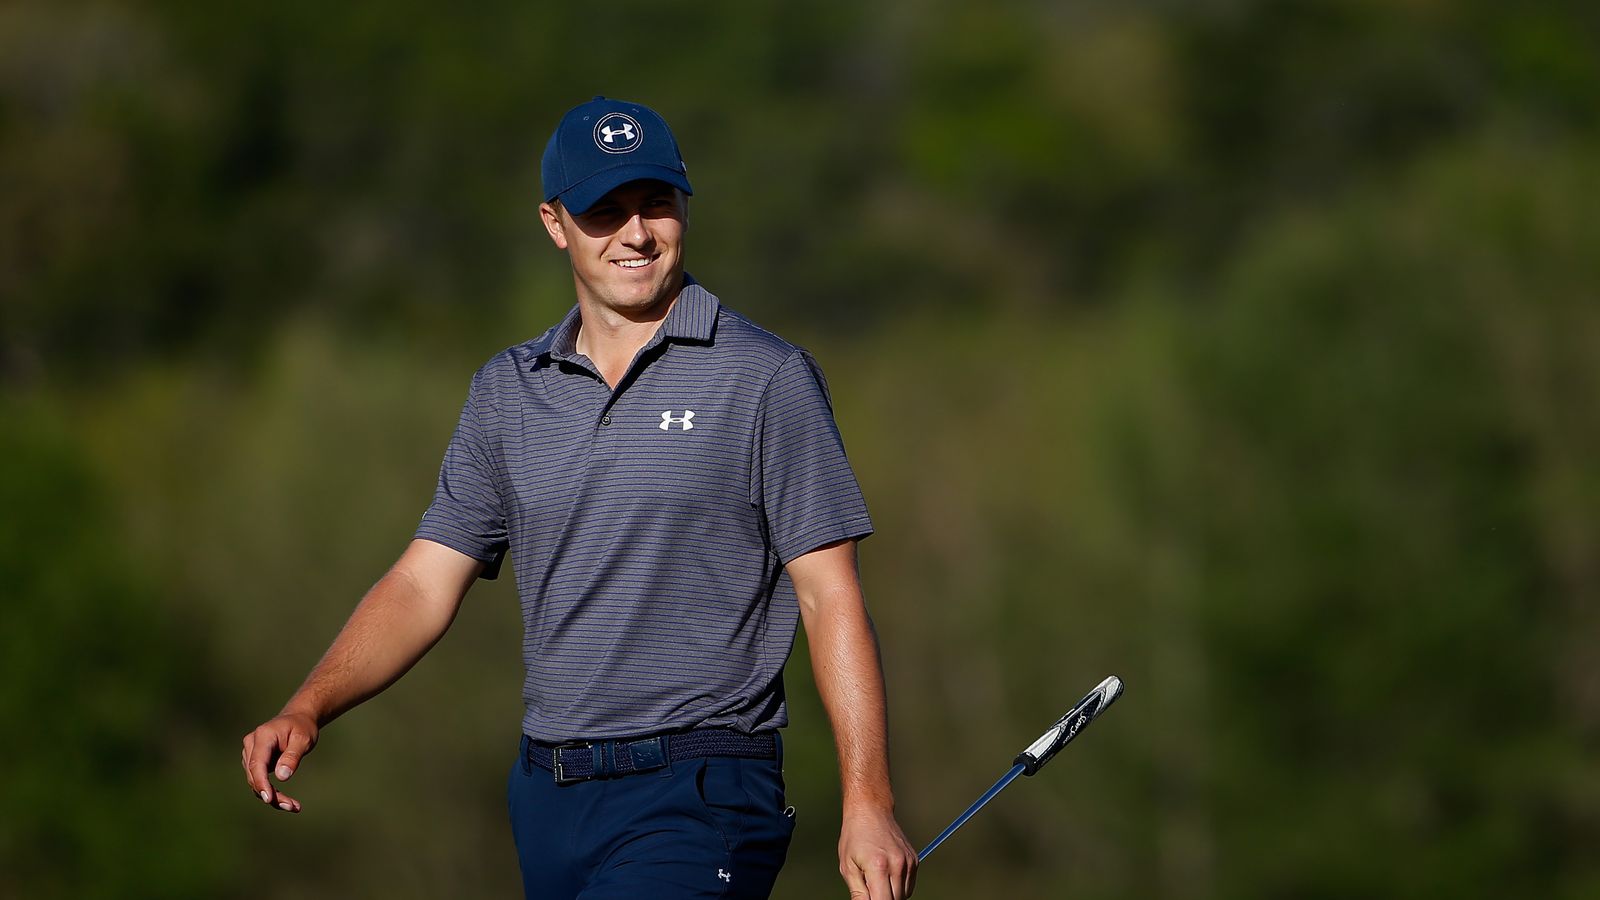 Jordan Spieth delights home fans at WGCDell Match Play as big names